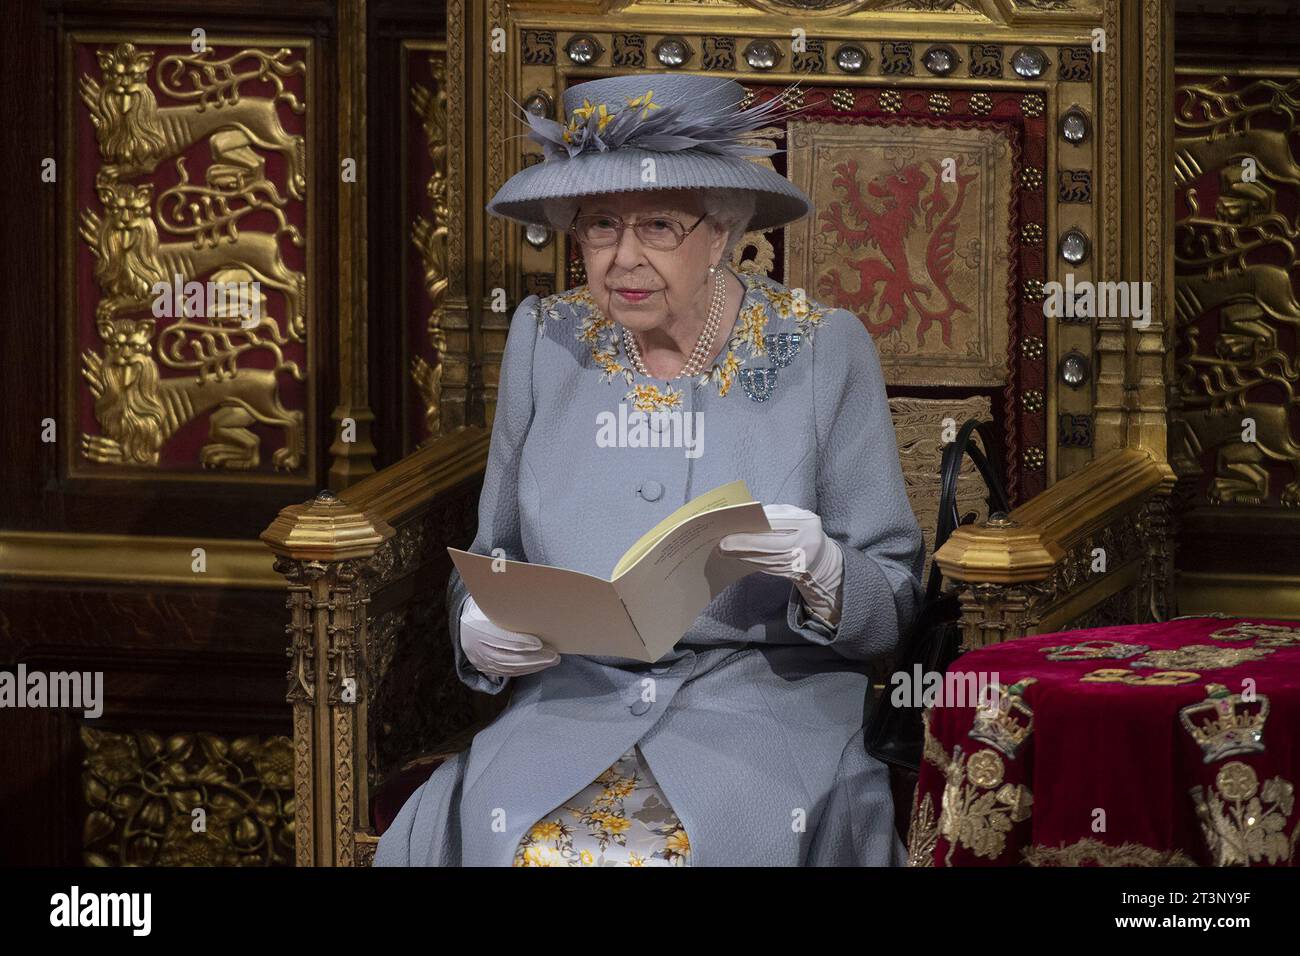 File photo dated 11/05/21 of Queen Elizabeth II delivering a speech from the throne in House of Lords at the Palace of Westminster in London. Parliament has been formally prorogued by a king for the first time in more than 70 years, following the death of Queen Elizabeth II. The announcement was read out on behalf of her son and current monarch, Charles, at a traditional ceremony in the House of Lords marking the end of the parliamentary session attended by both MPs and peers. Stock Photo